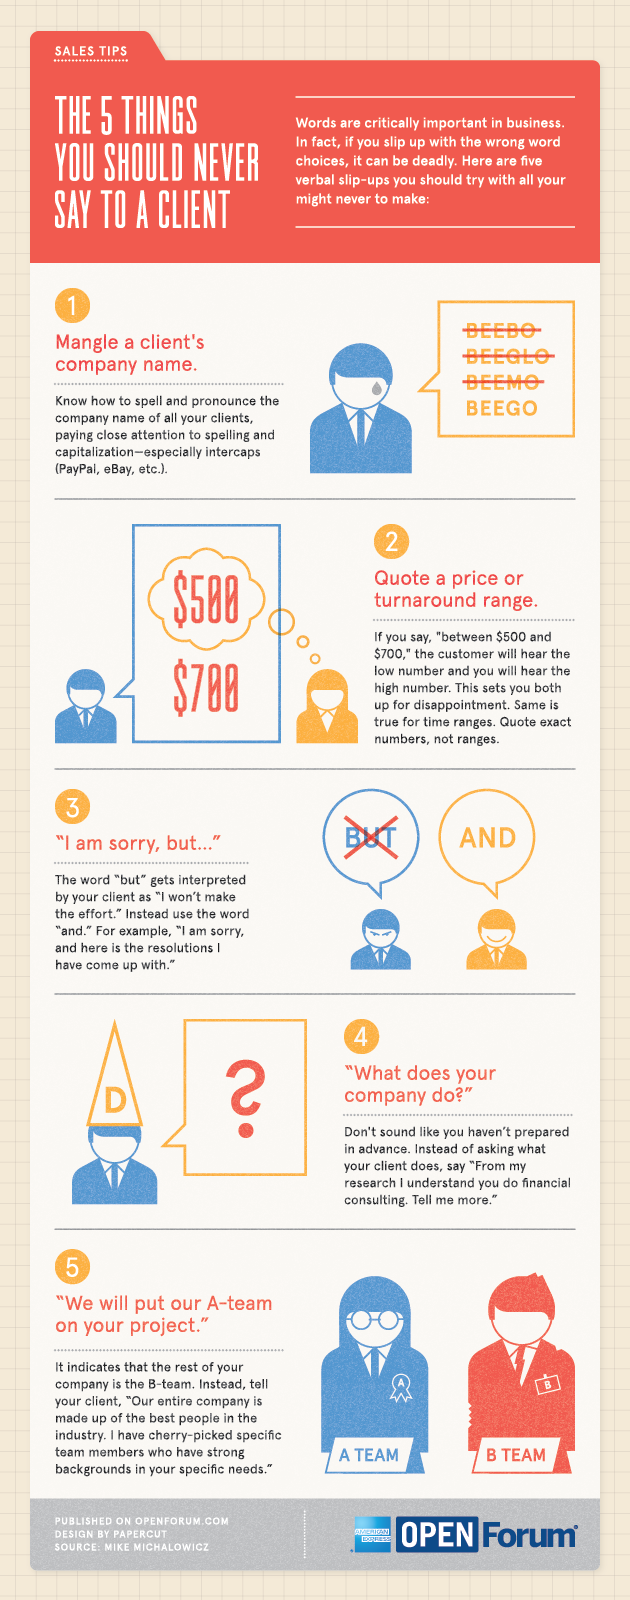 This infographic looks at some statements that could get you in hot water with a client.